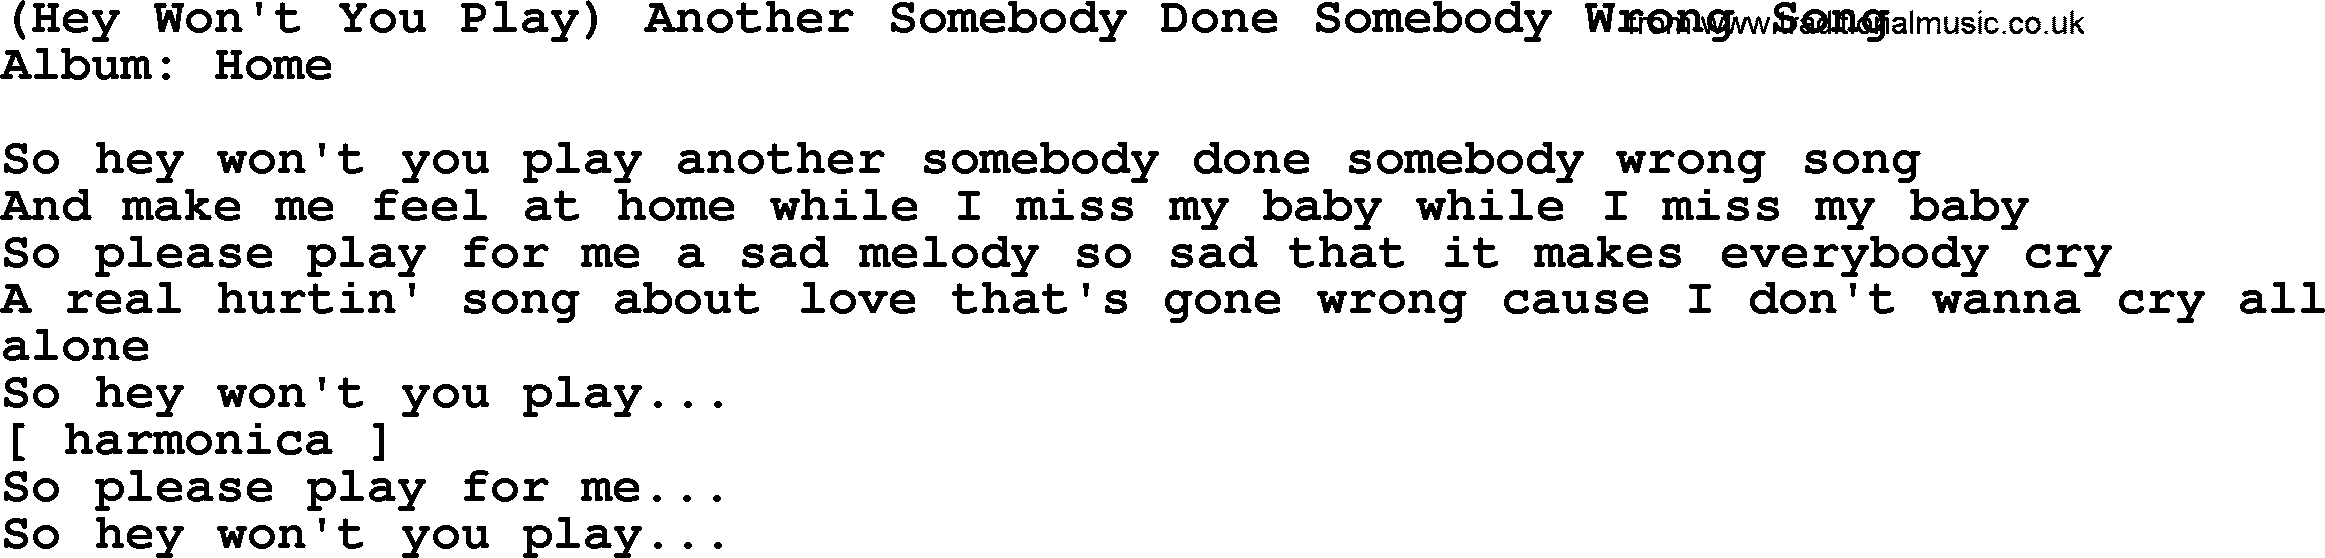 Loretta Lynn song: Another Somebody Done Somebody Wrong Song lyrics